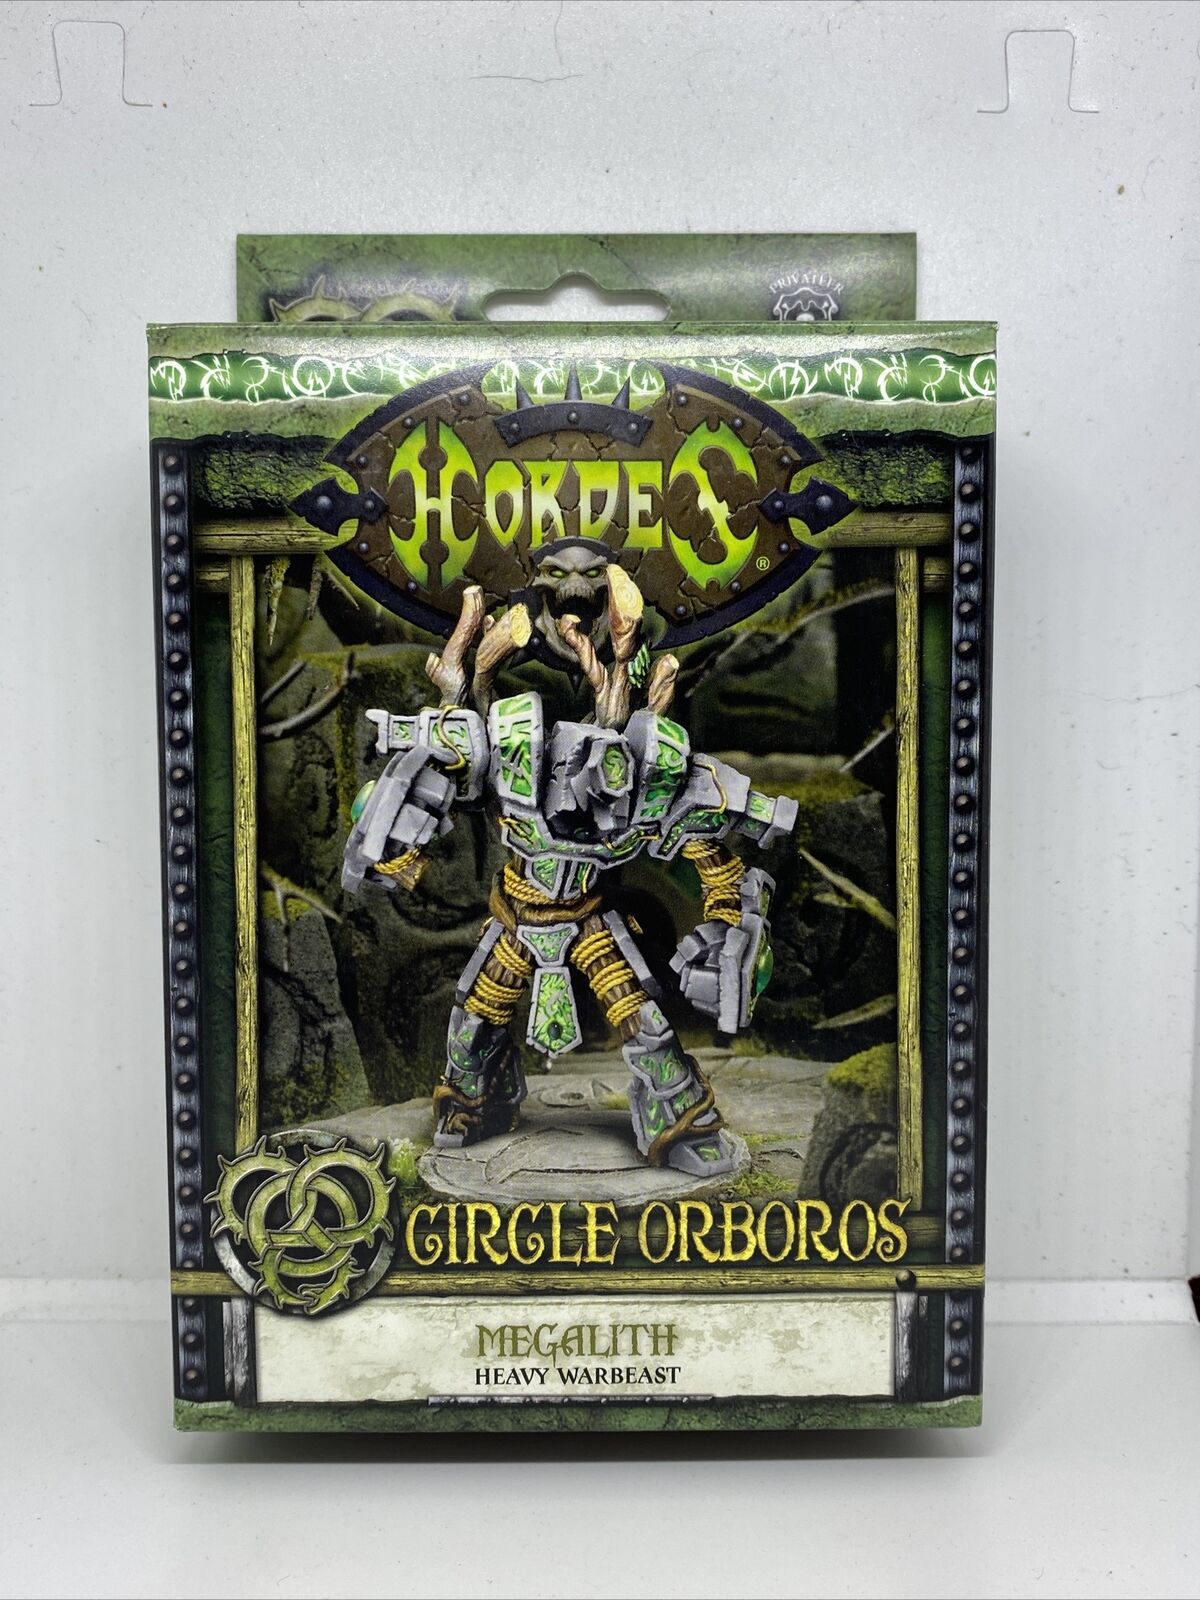 depot Hordes - MEGALITH HEAVY Weekly update PIP72097 Circle WARBEAST Orboros